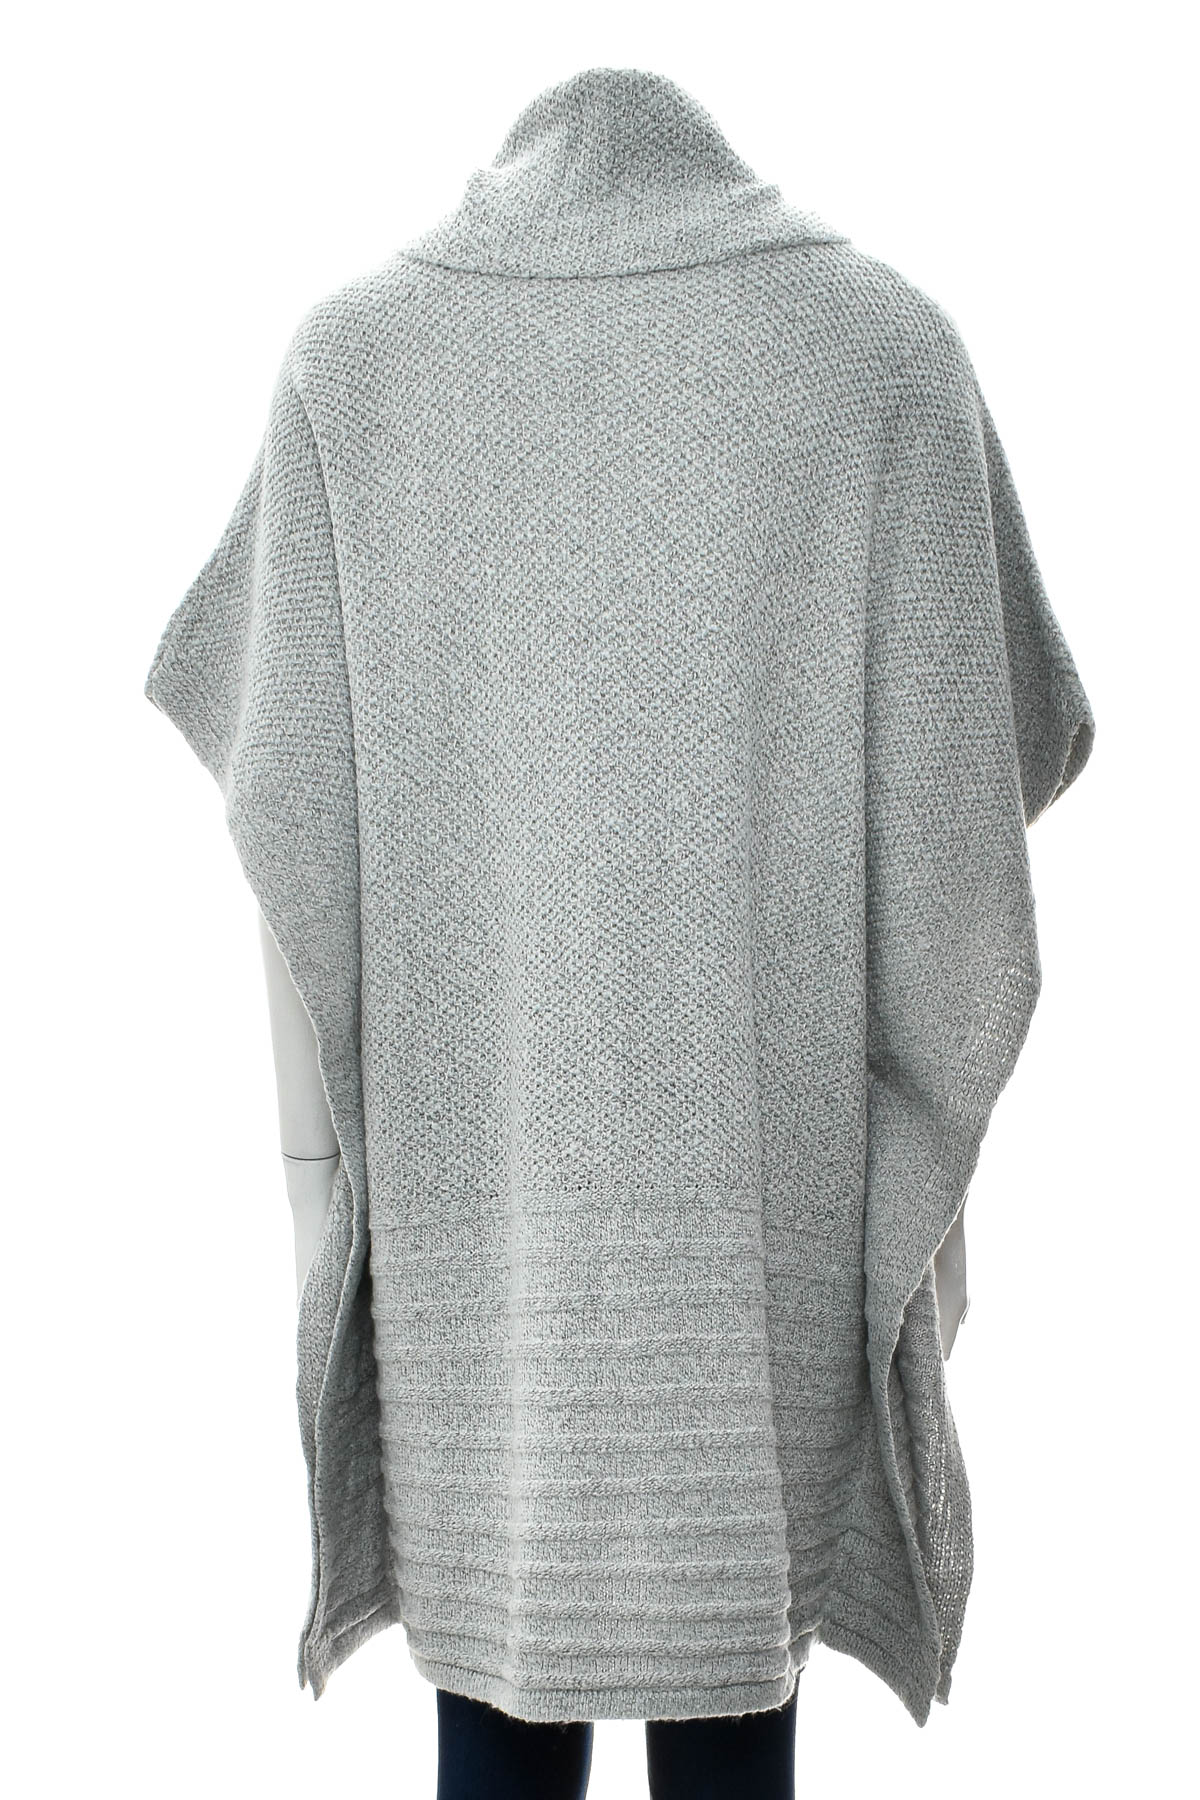 Women's sweater - B Collection - 1